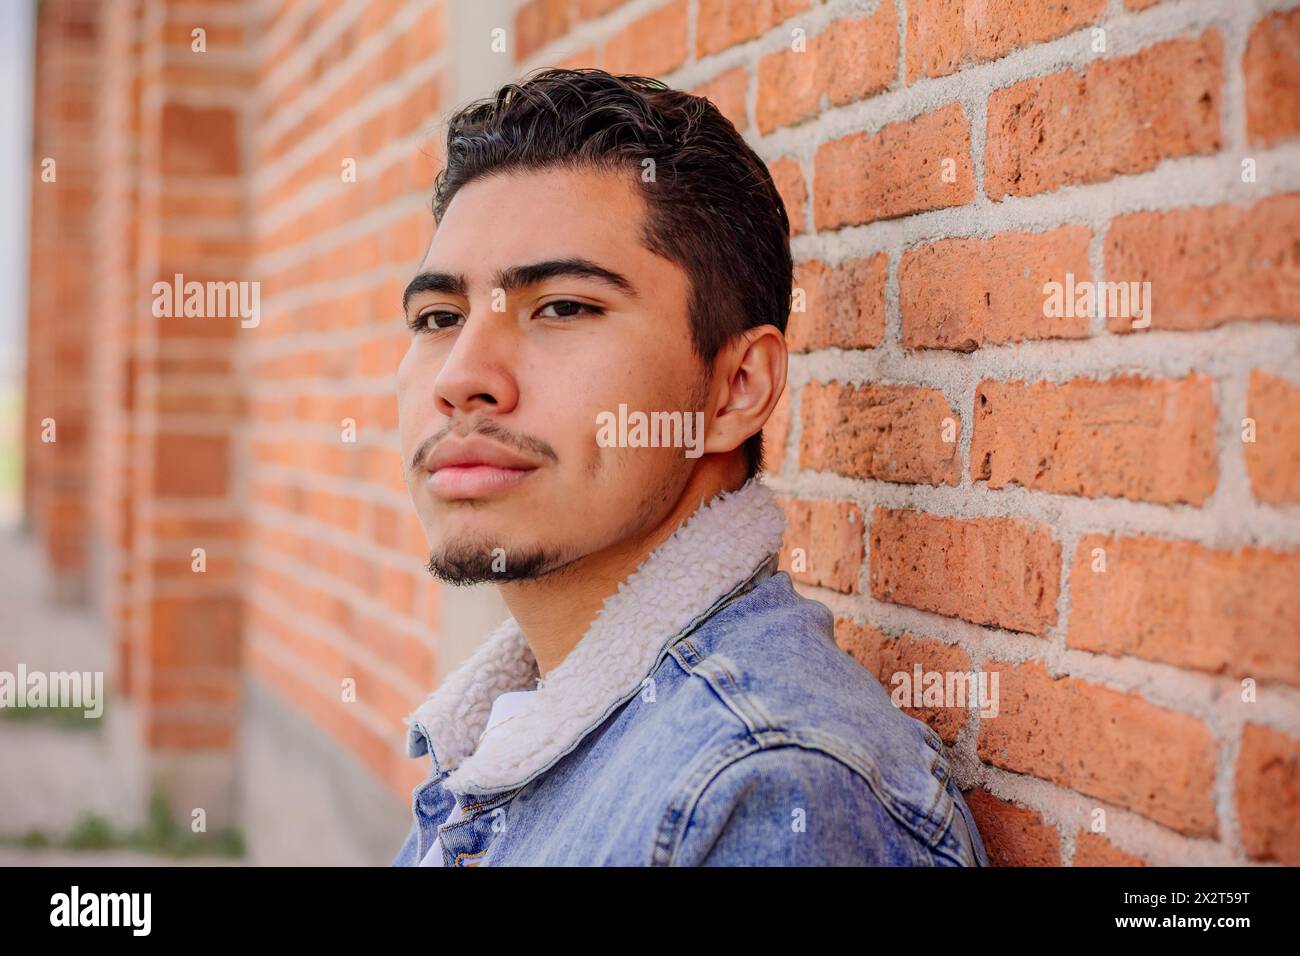 Thoughtful young man by brick wall Stock Photo